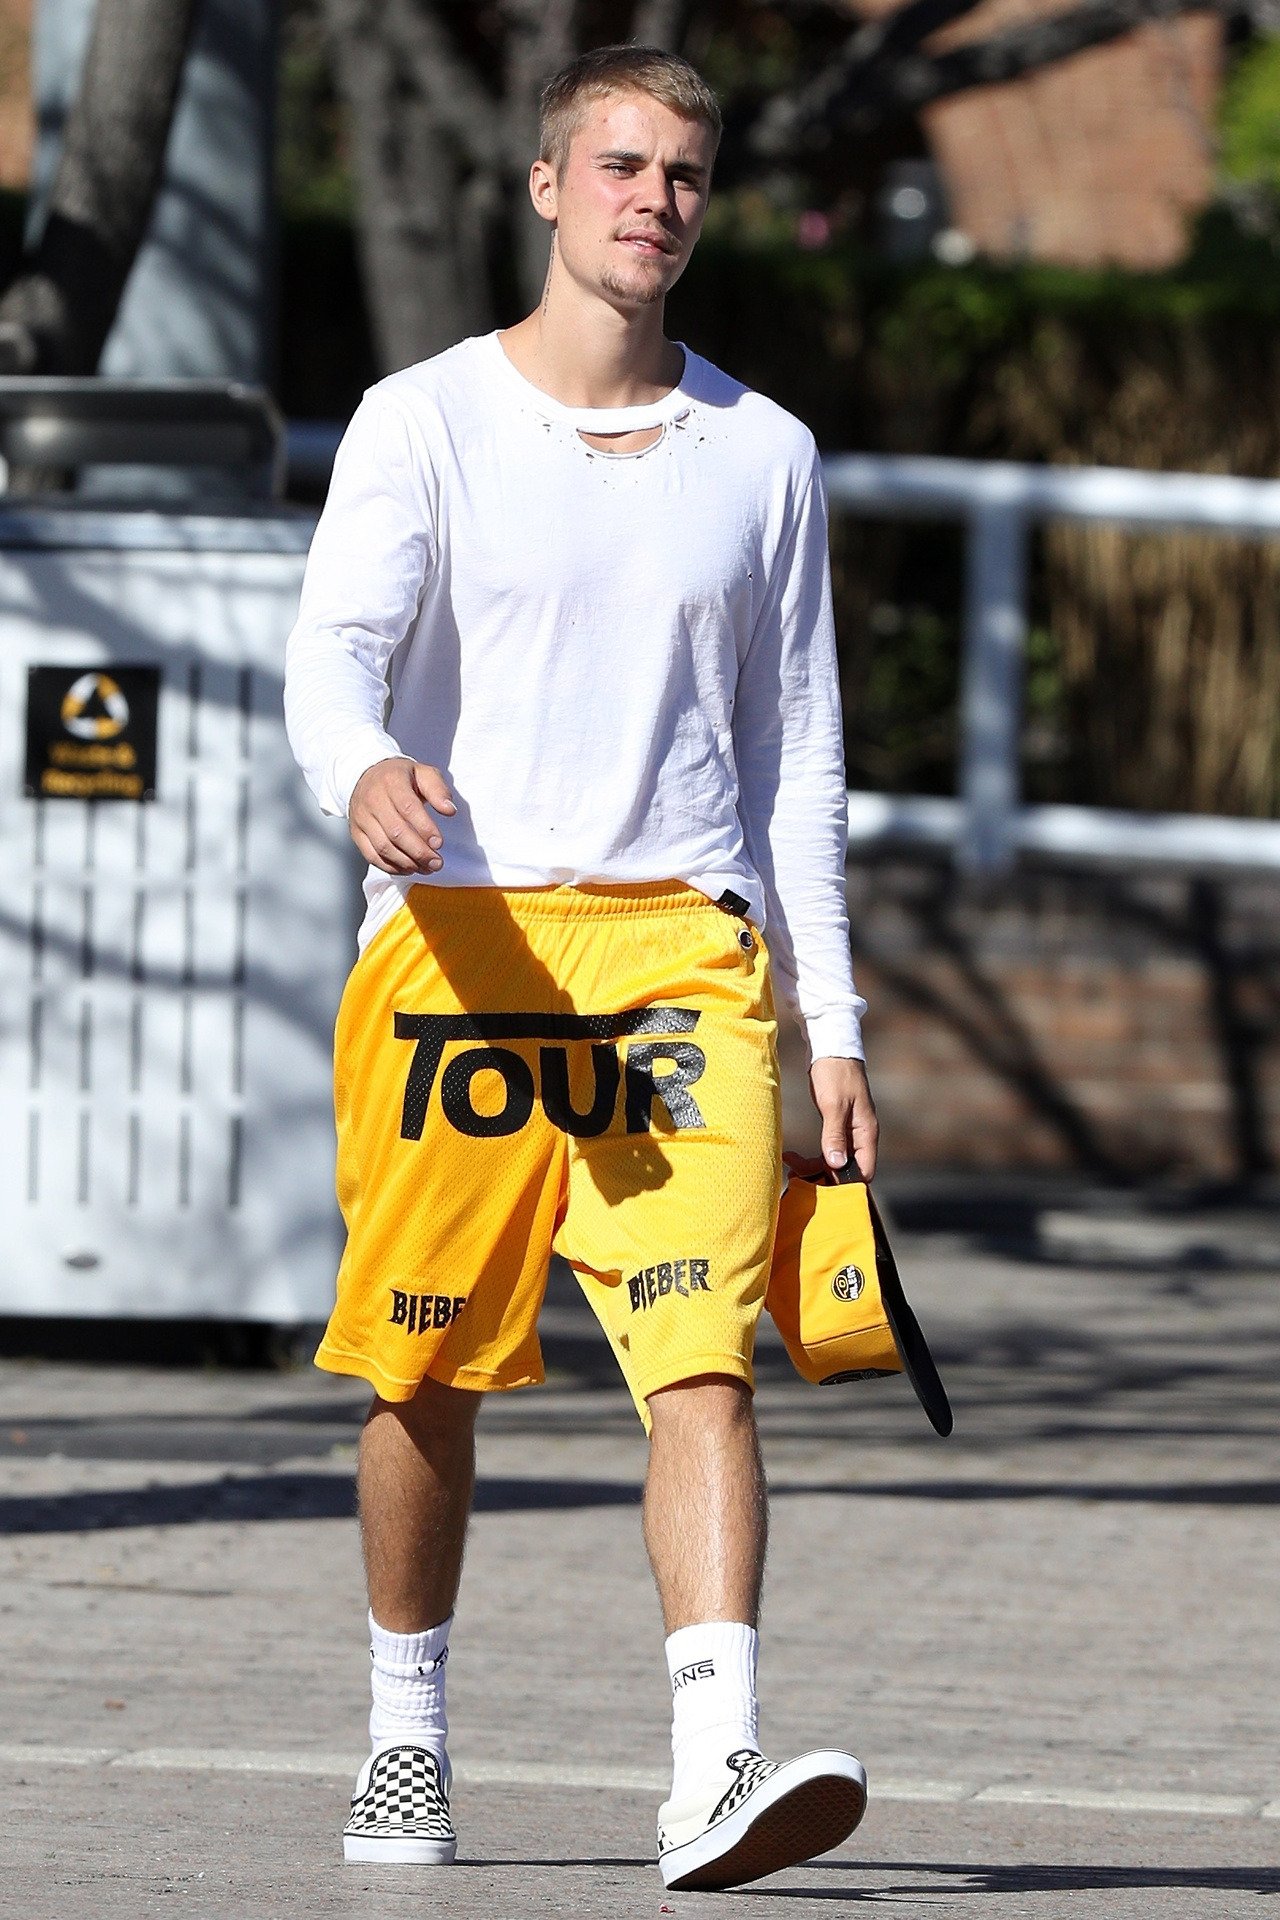 Bieber Clothing on Twitter: "Justin in Sydney, Australia (July 4) wearing a PEOPLE VS long sleeve, PURPOSE THE STADIUM TOUR shorts, ADIDAS socks and VANS shoes. https://t.co/nZRCNjPwao" / Twitter